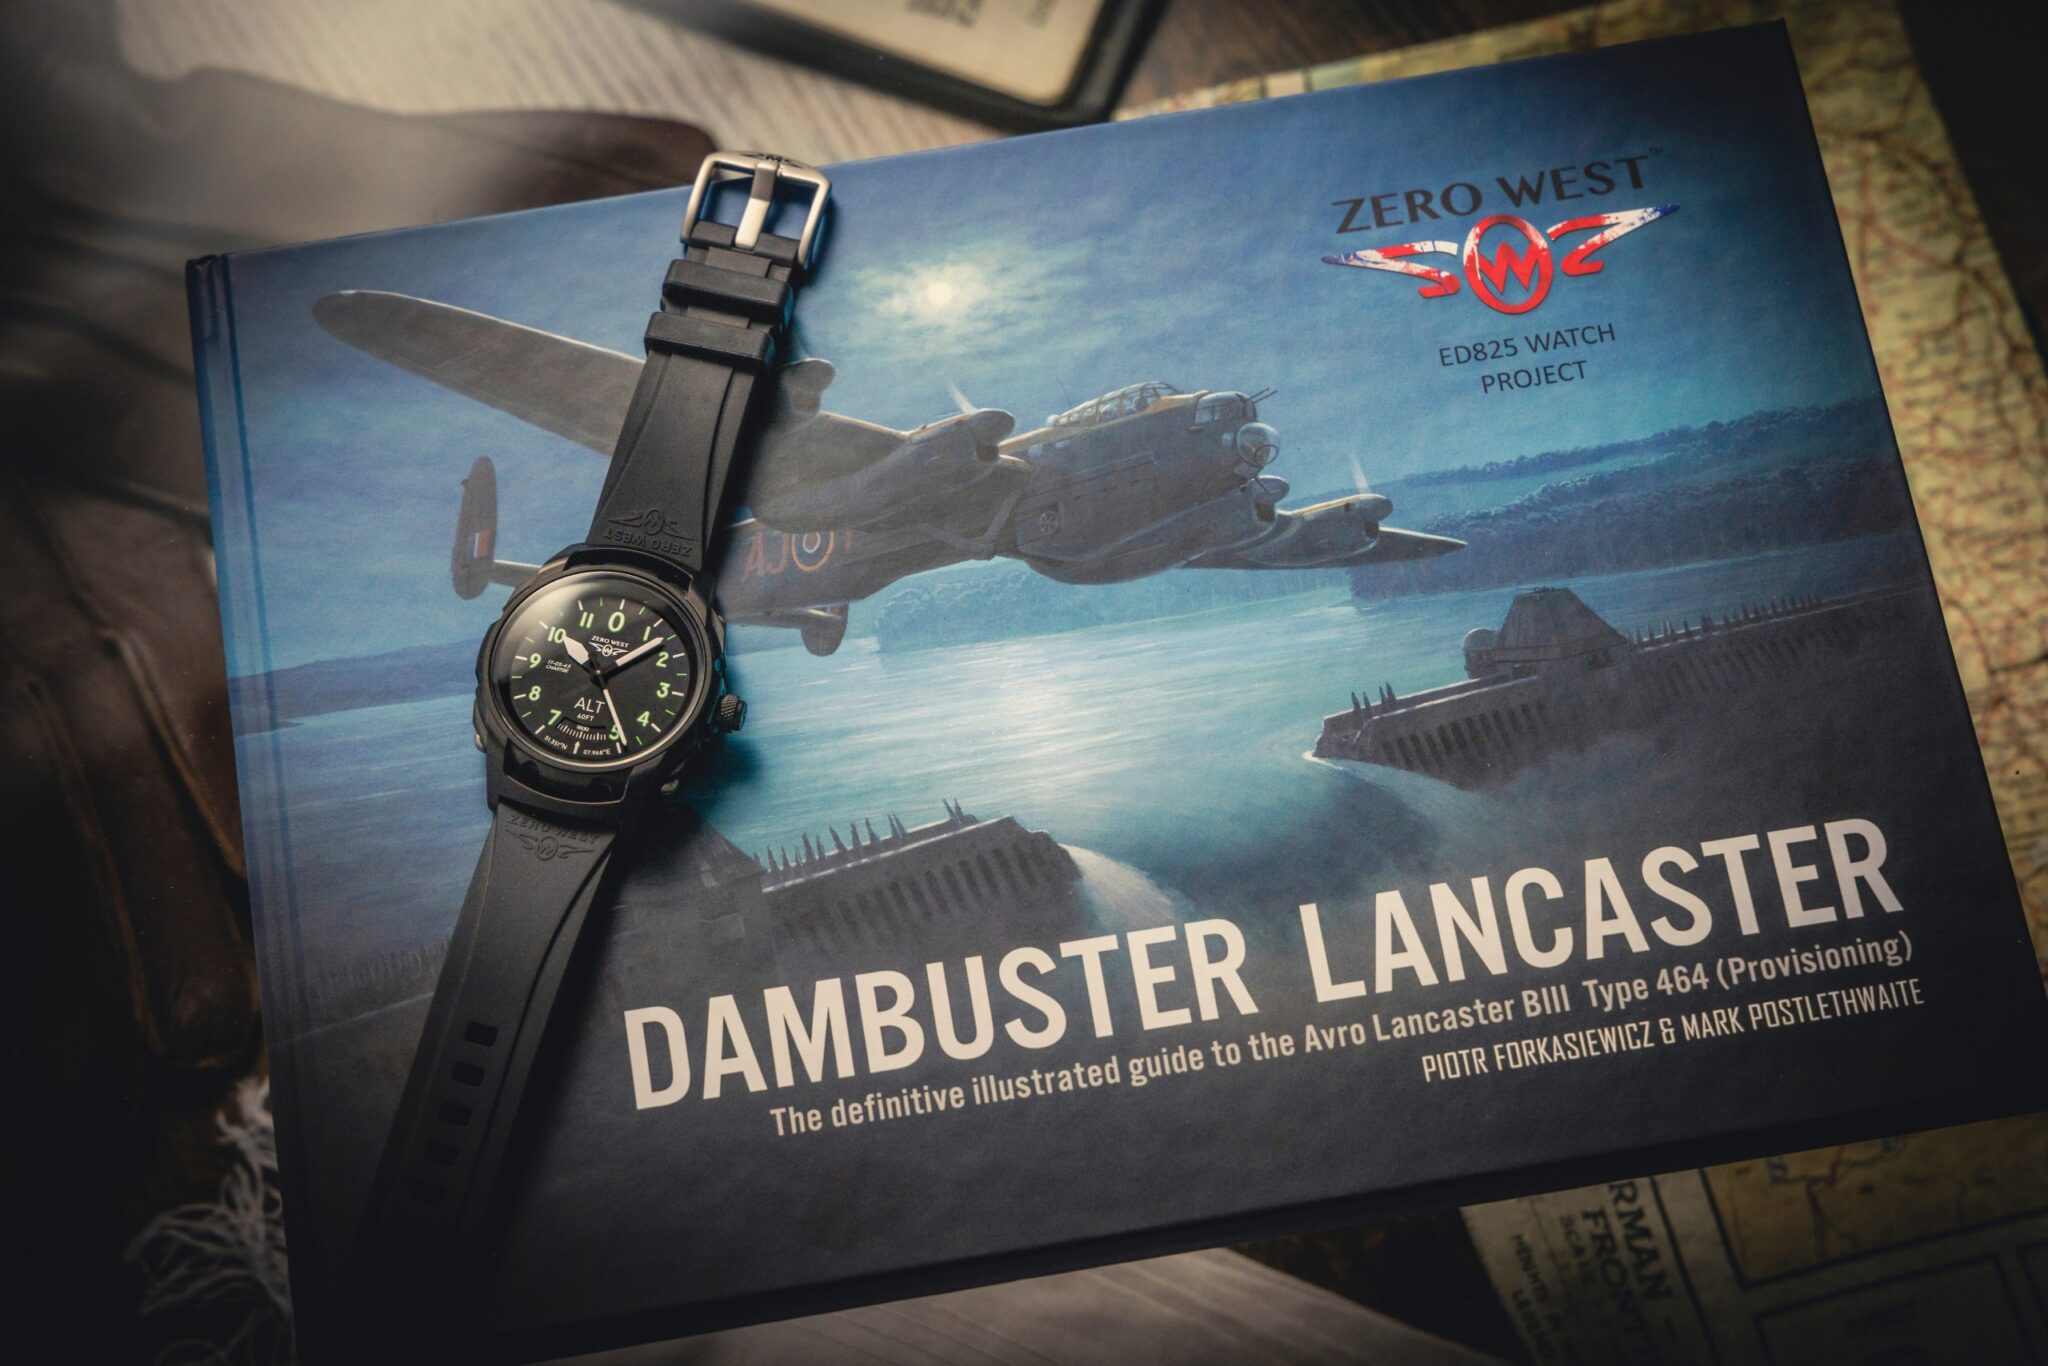 Dambuster Lancaster book with DB1 Blackout on top with black strap